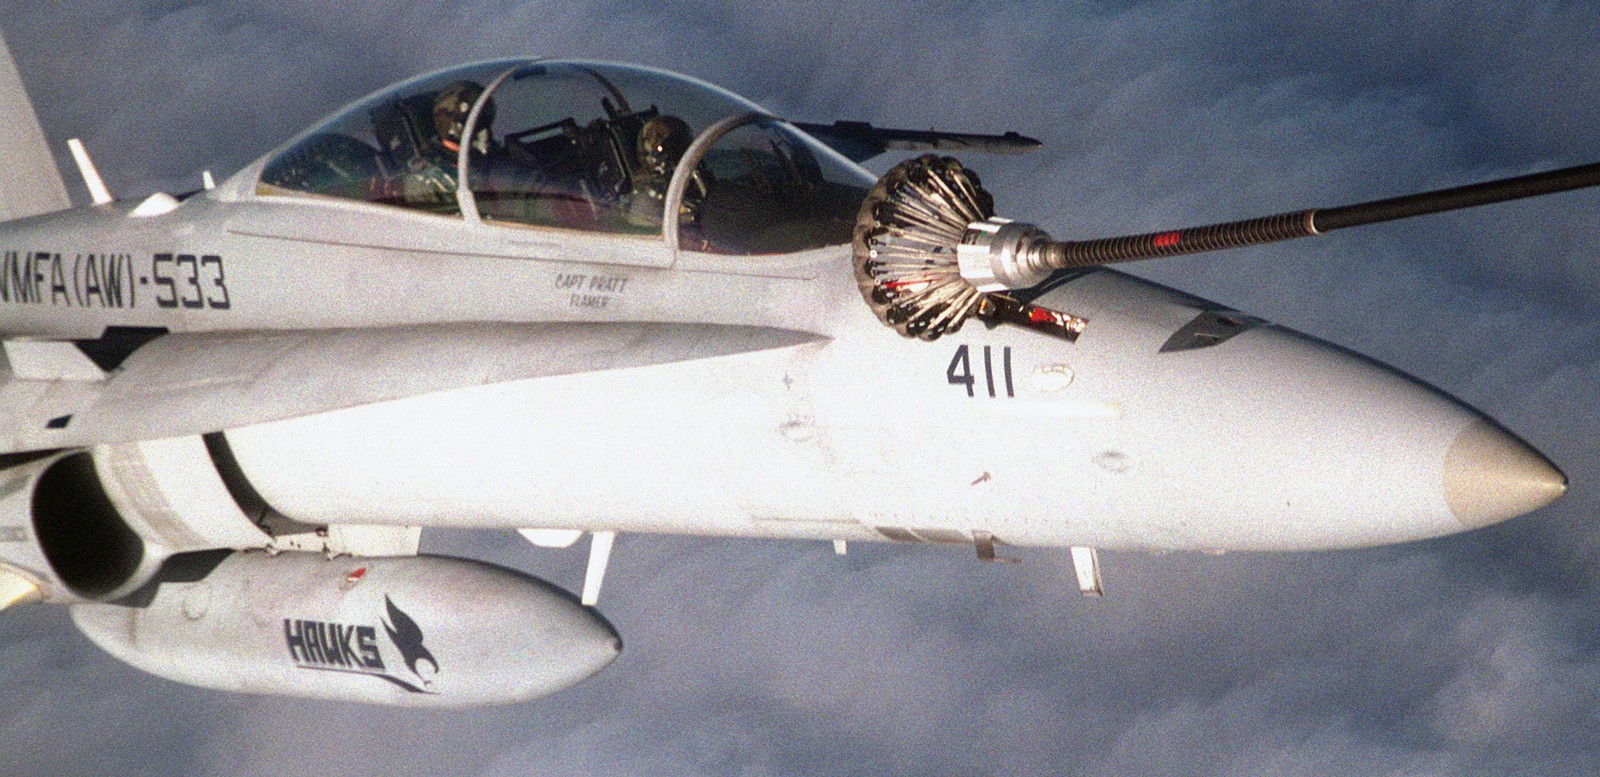 vmfa(aw)-533 hawks marine fighter attack squadron usmc f/a-18d hornet 94 exercise beachcrest